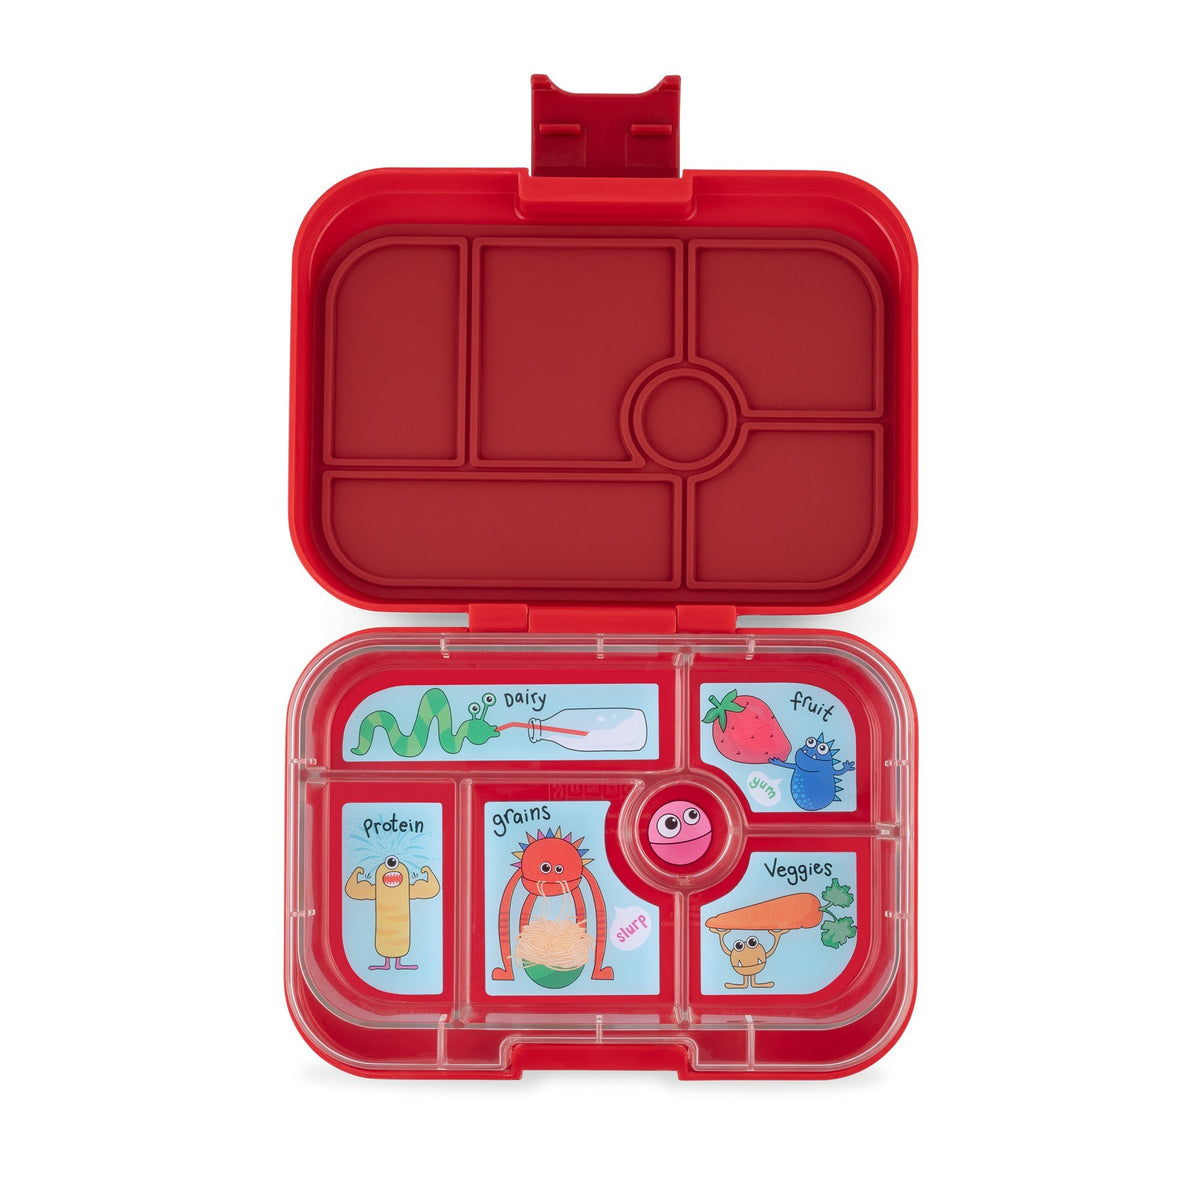 Yumbox Original Wow Red 6 Compartment Lunch Box